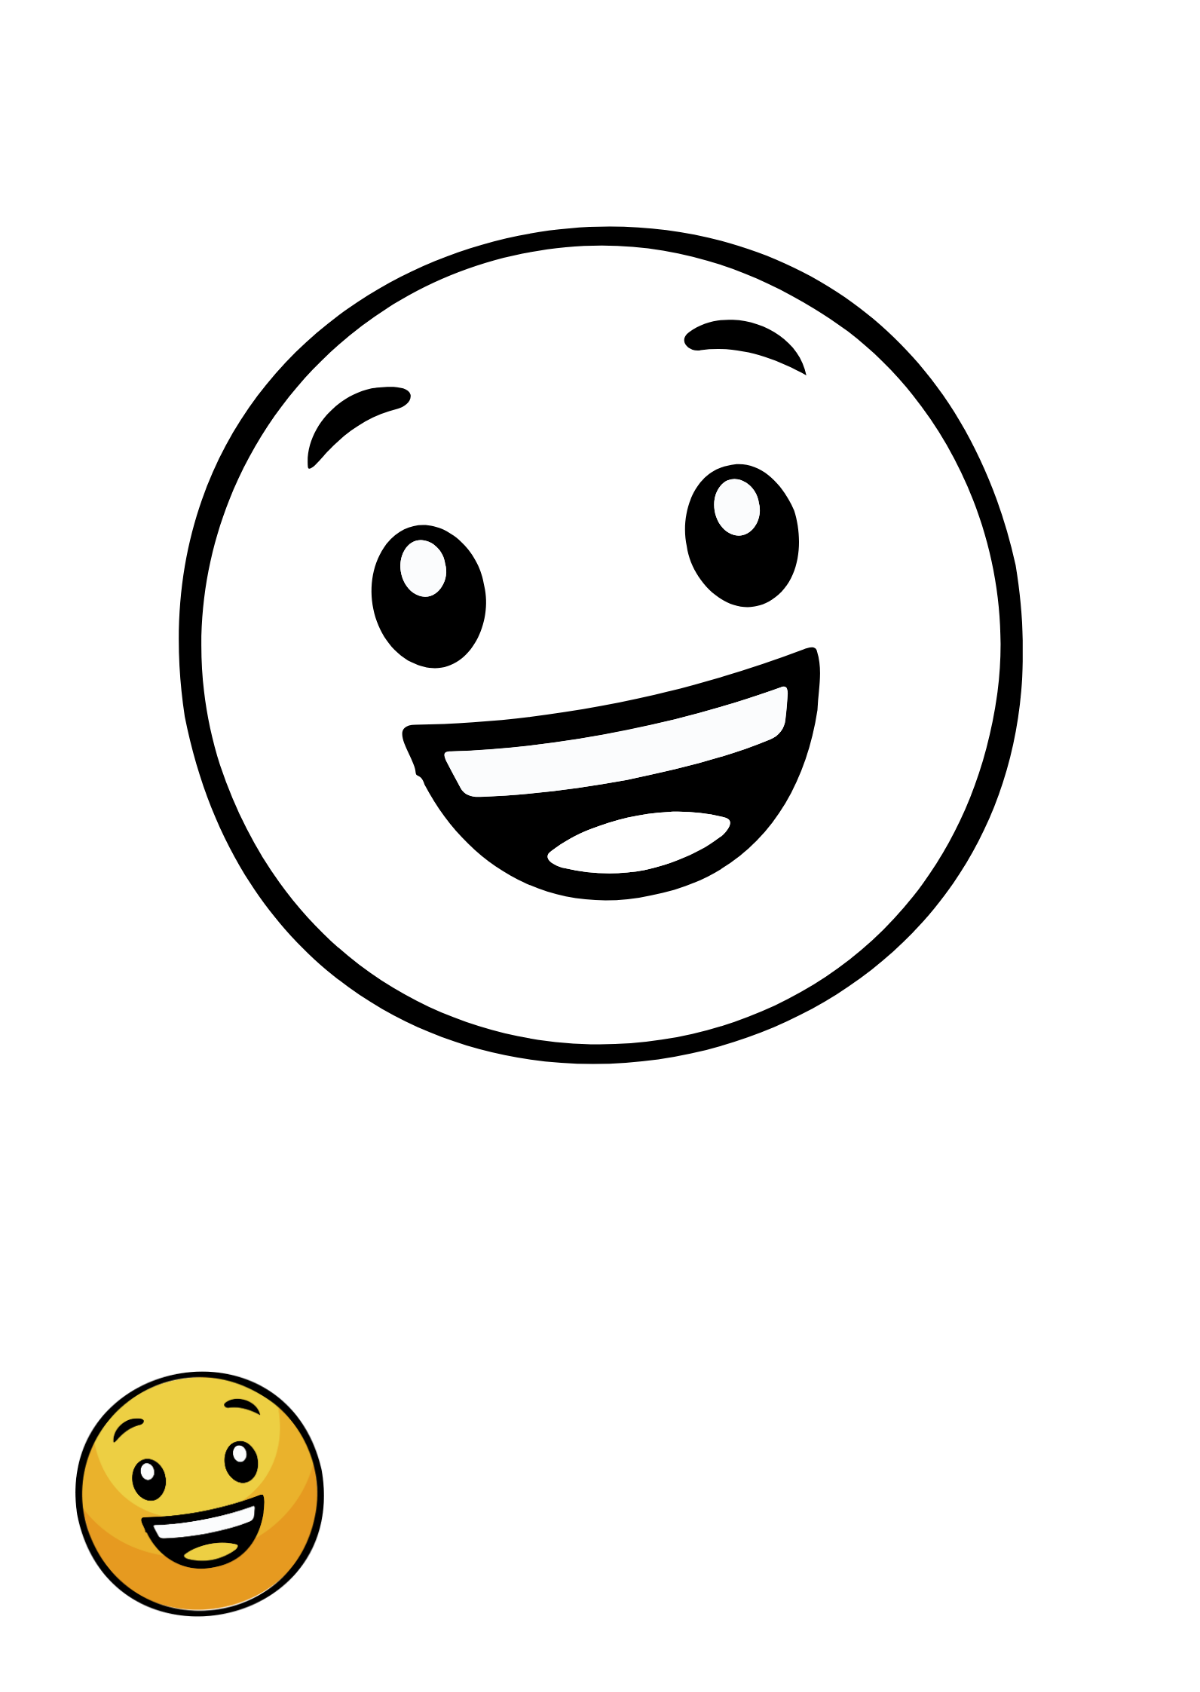 Cartoon Yellow Smiley coloring page Template